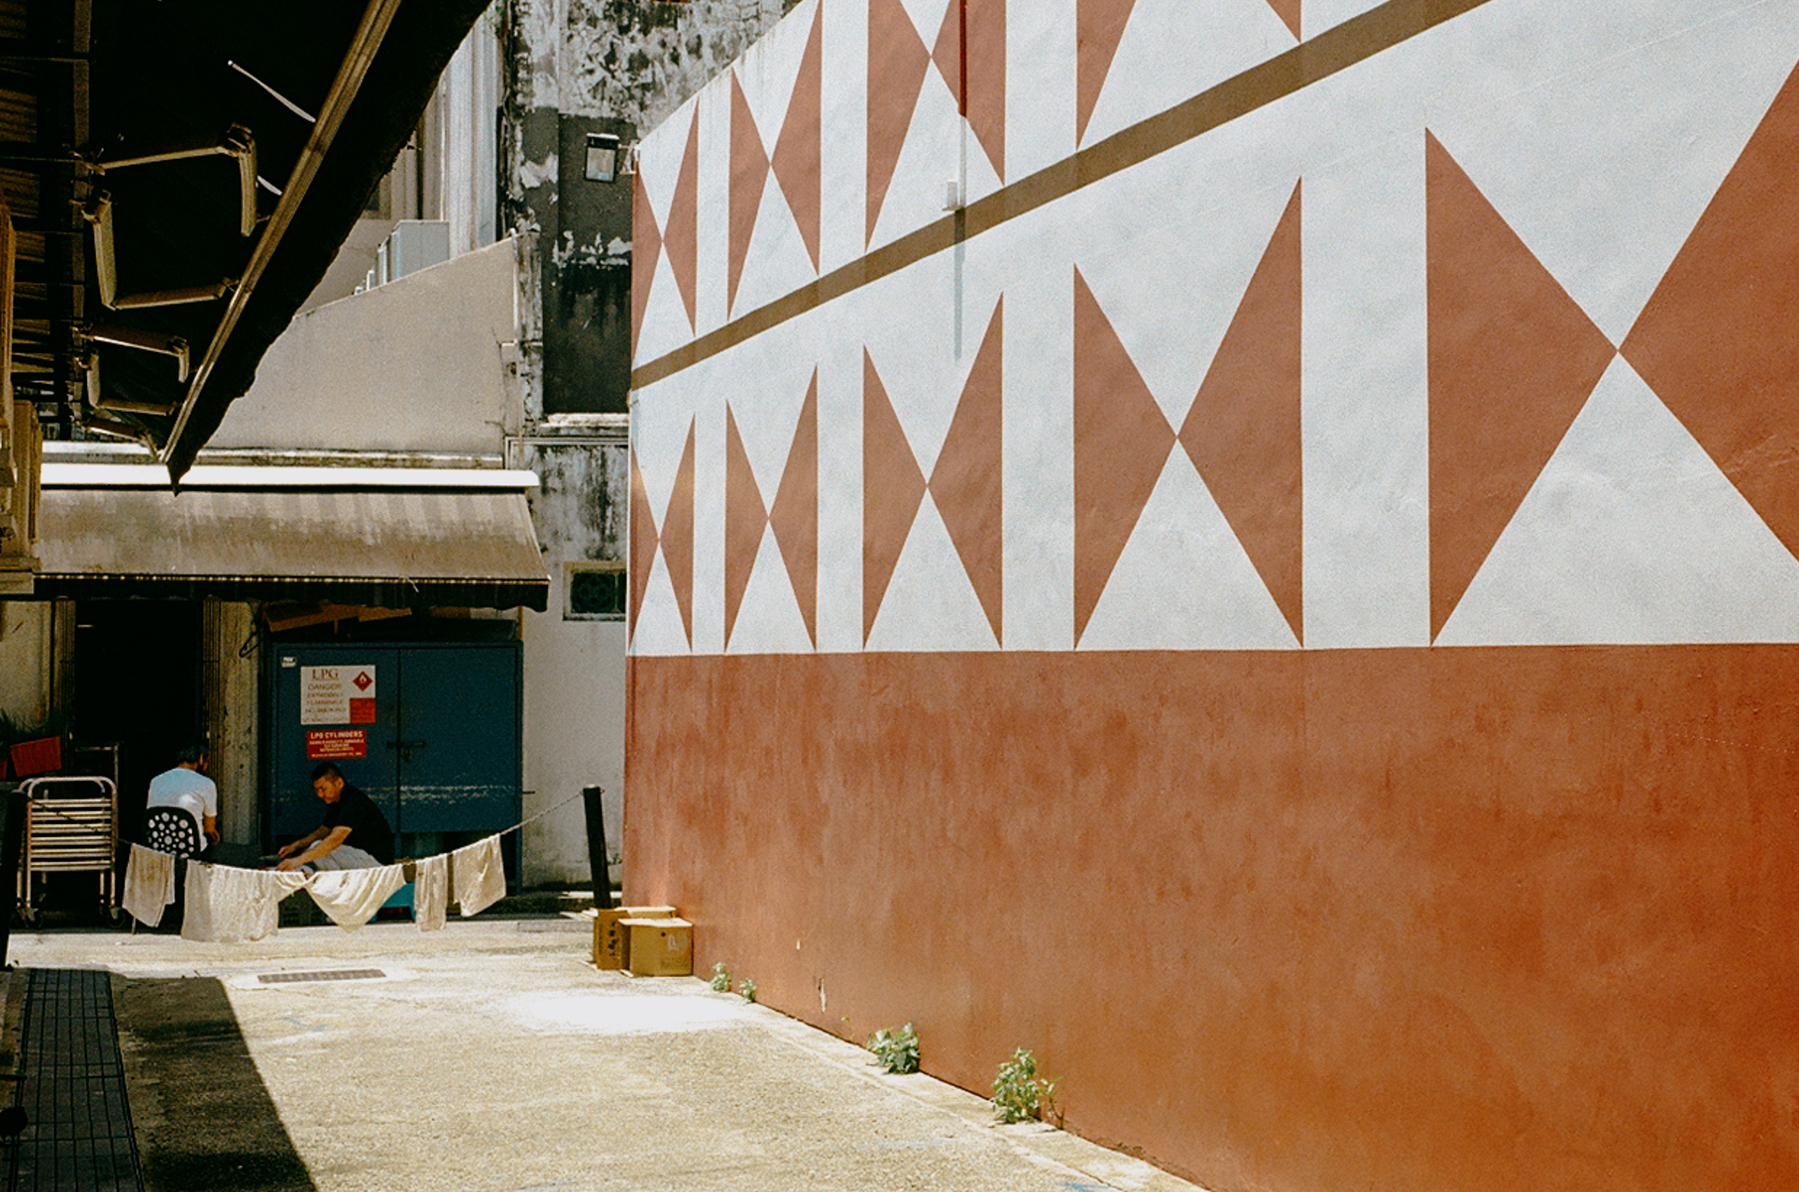 5. A scan of a color photo of two men in little India sitting at the back of a restaurant. An alley opens up into them, and the foreground wall is painted with geometric clay color and shapes, indicating it is part of a Hindu temple next door